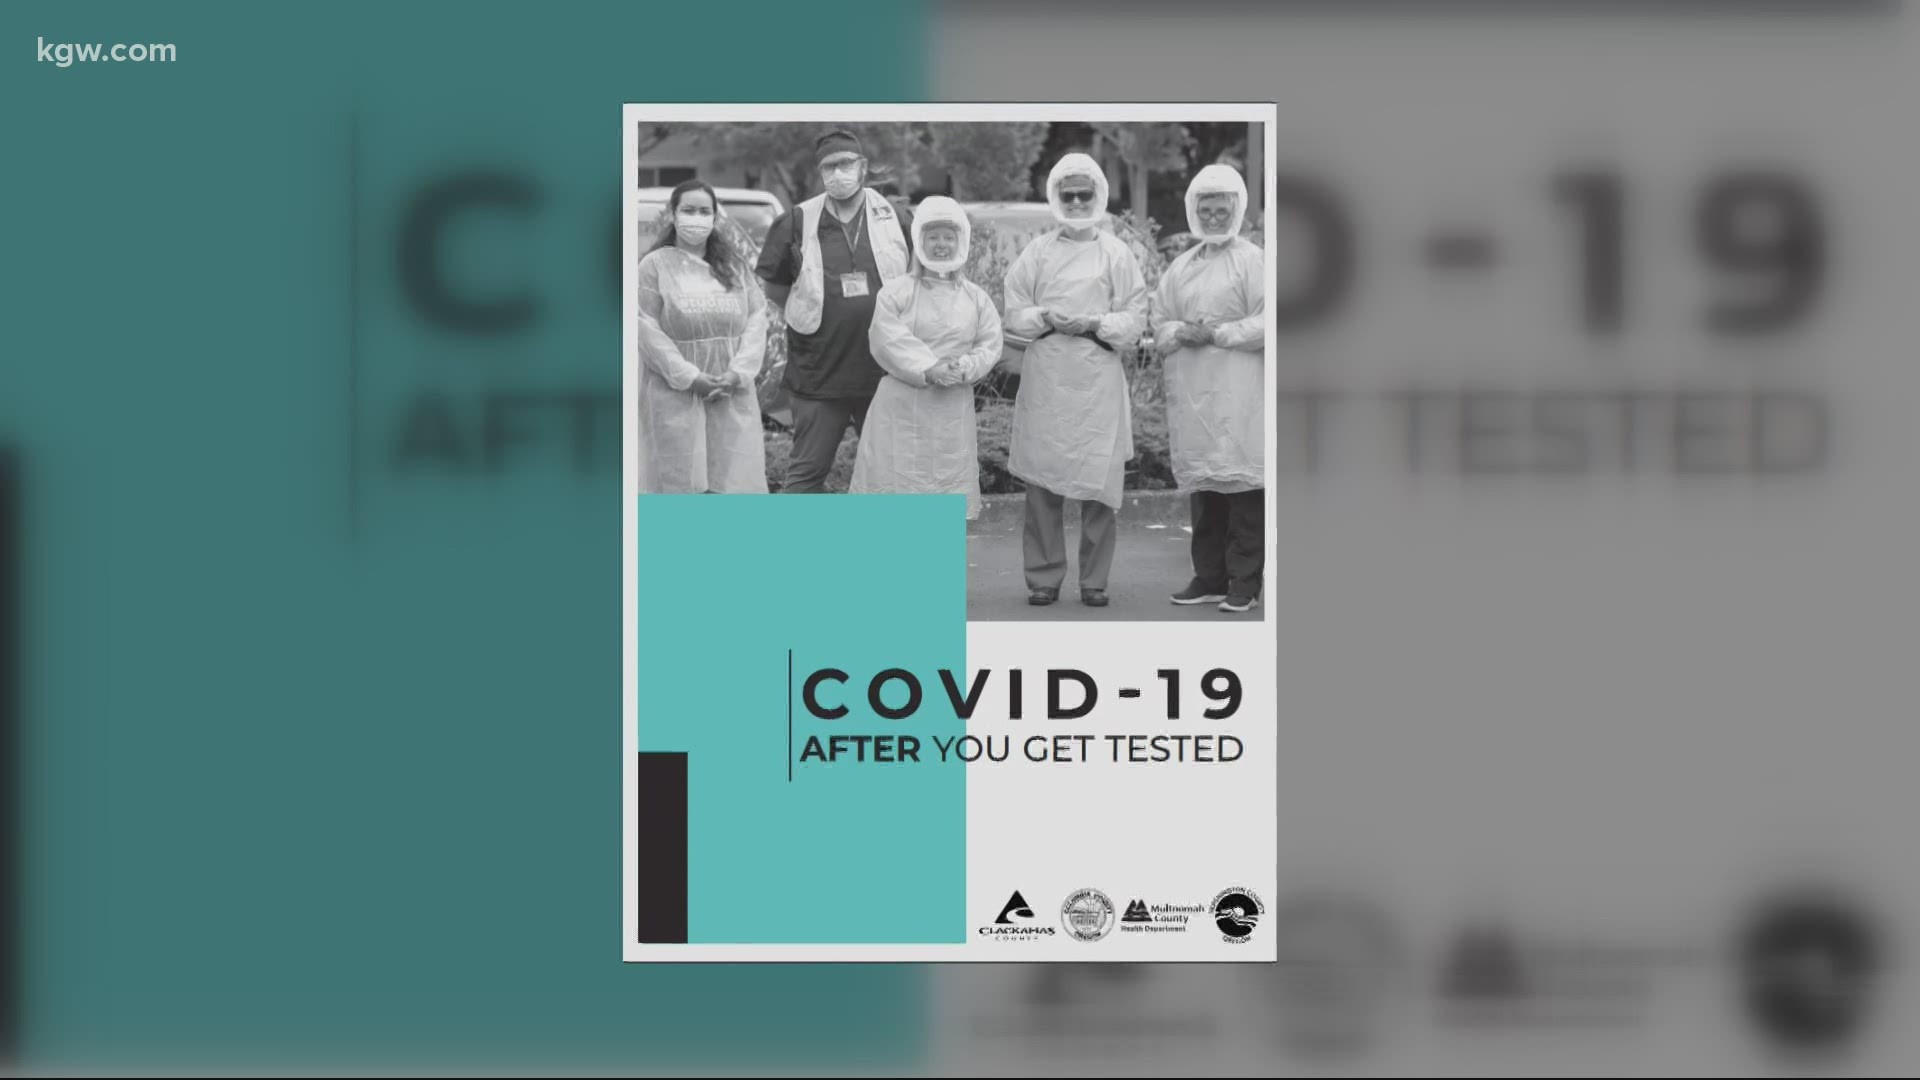 Metro area health officials are making a final plea, asking the public to cancel or drastically scale back Thanksgiving plans as COVID-19 cases continue to rise.